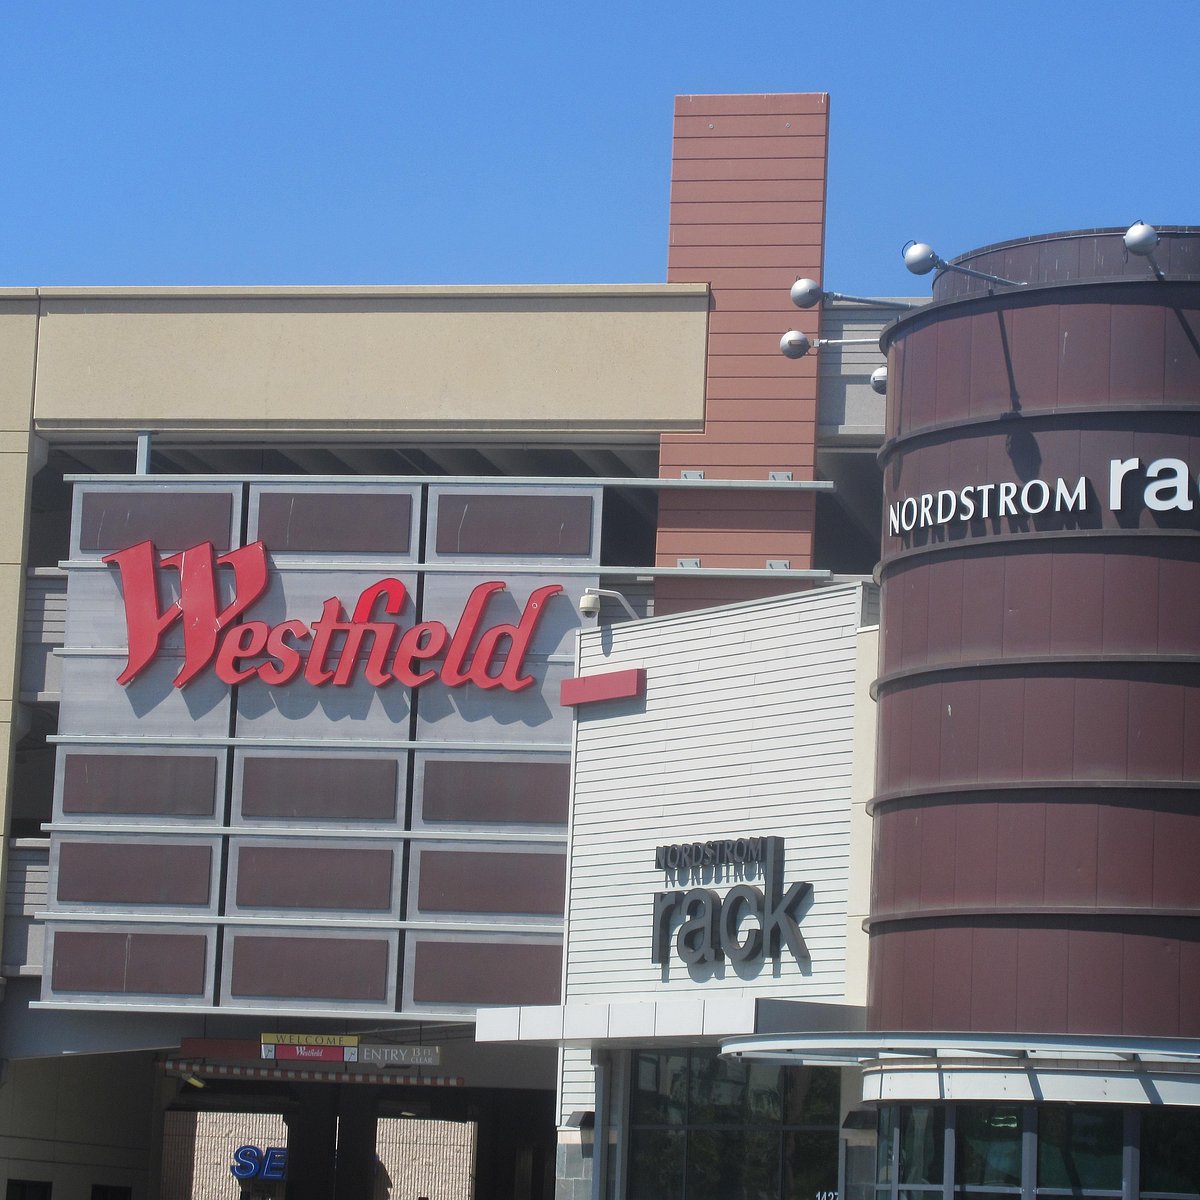 Nordstrom Rack location to open at Deerfoot Meadows